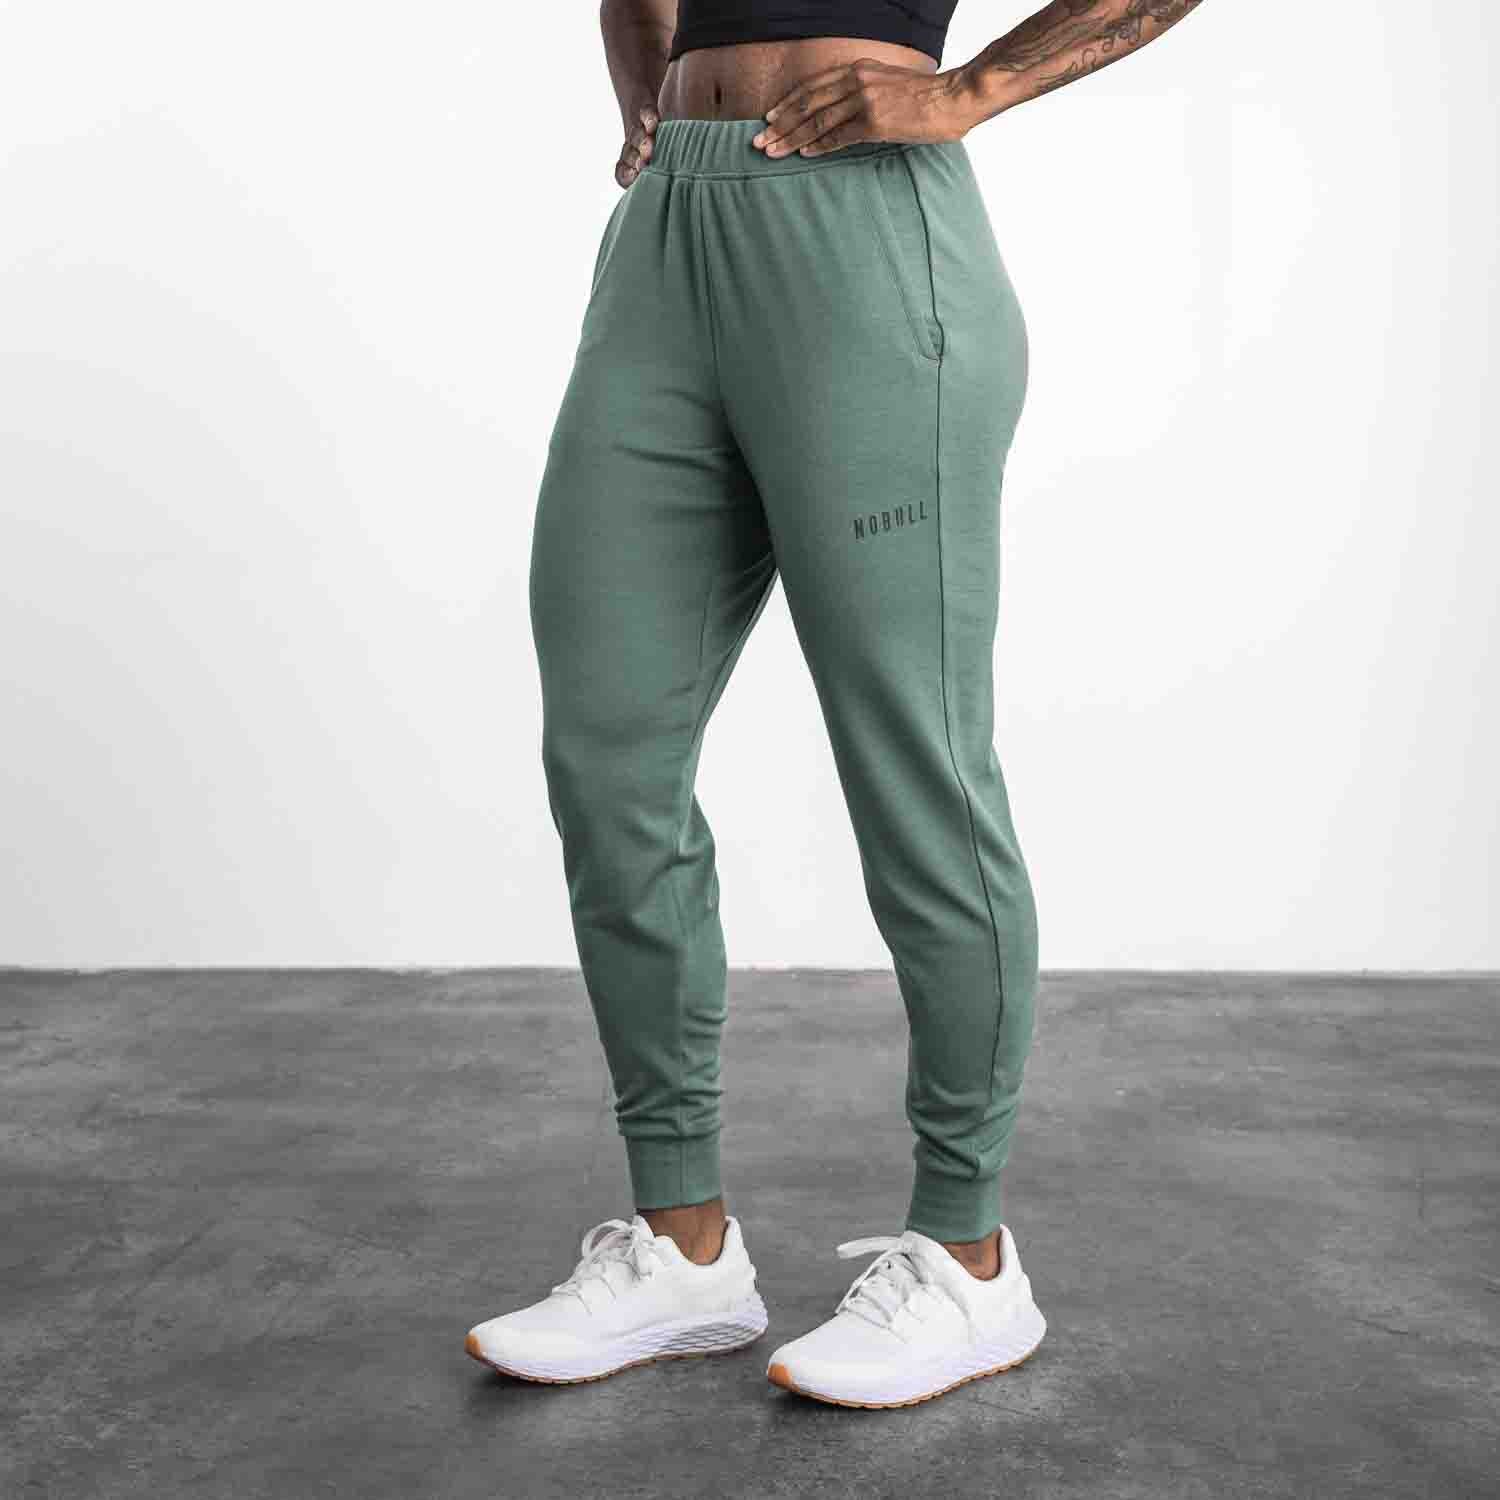 THE GYM PEOPLE Women's Tapered Lounge Sweatpants Nepal